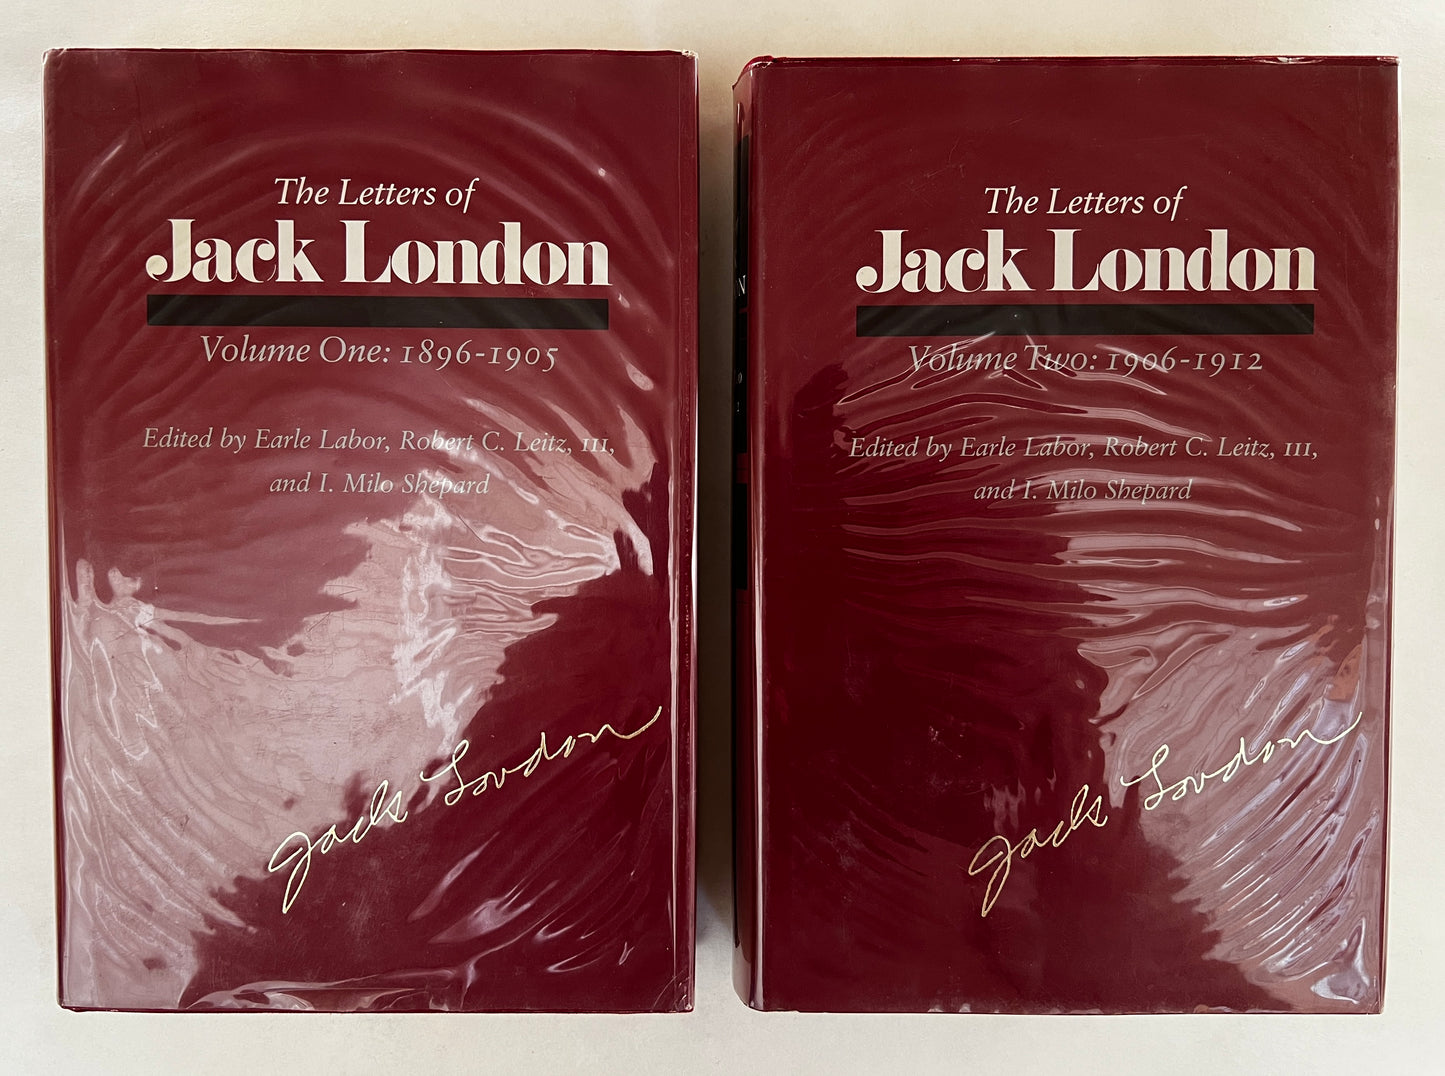 The Letters of Jack London